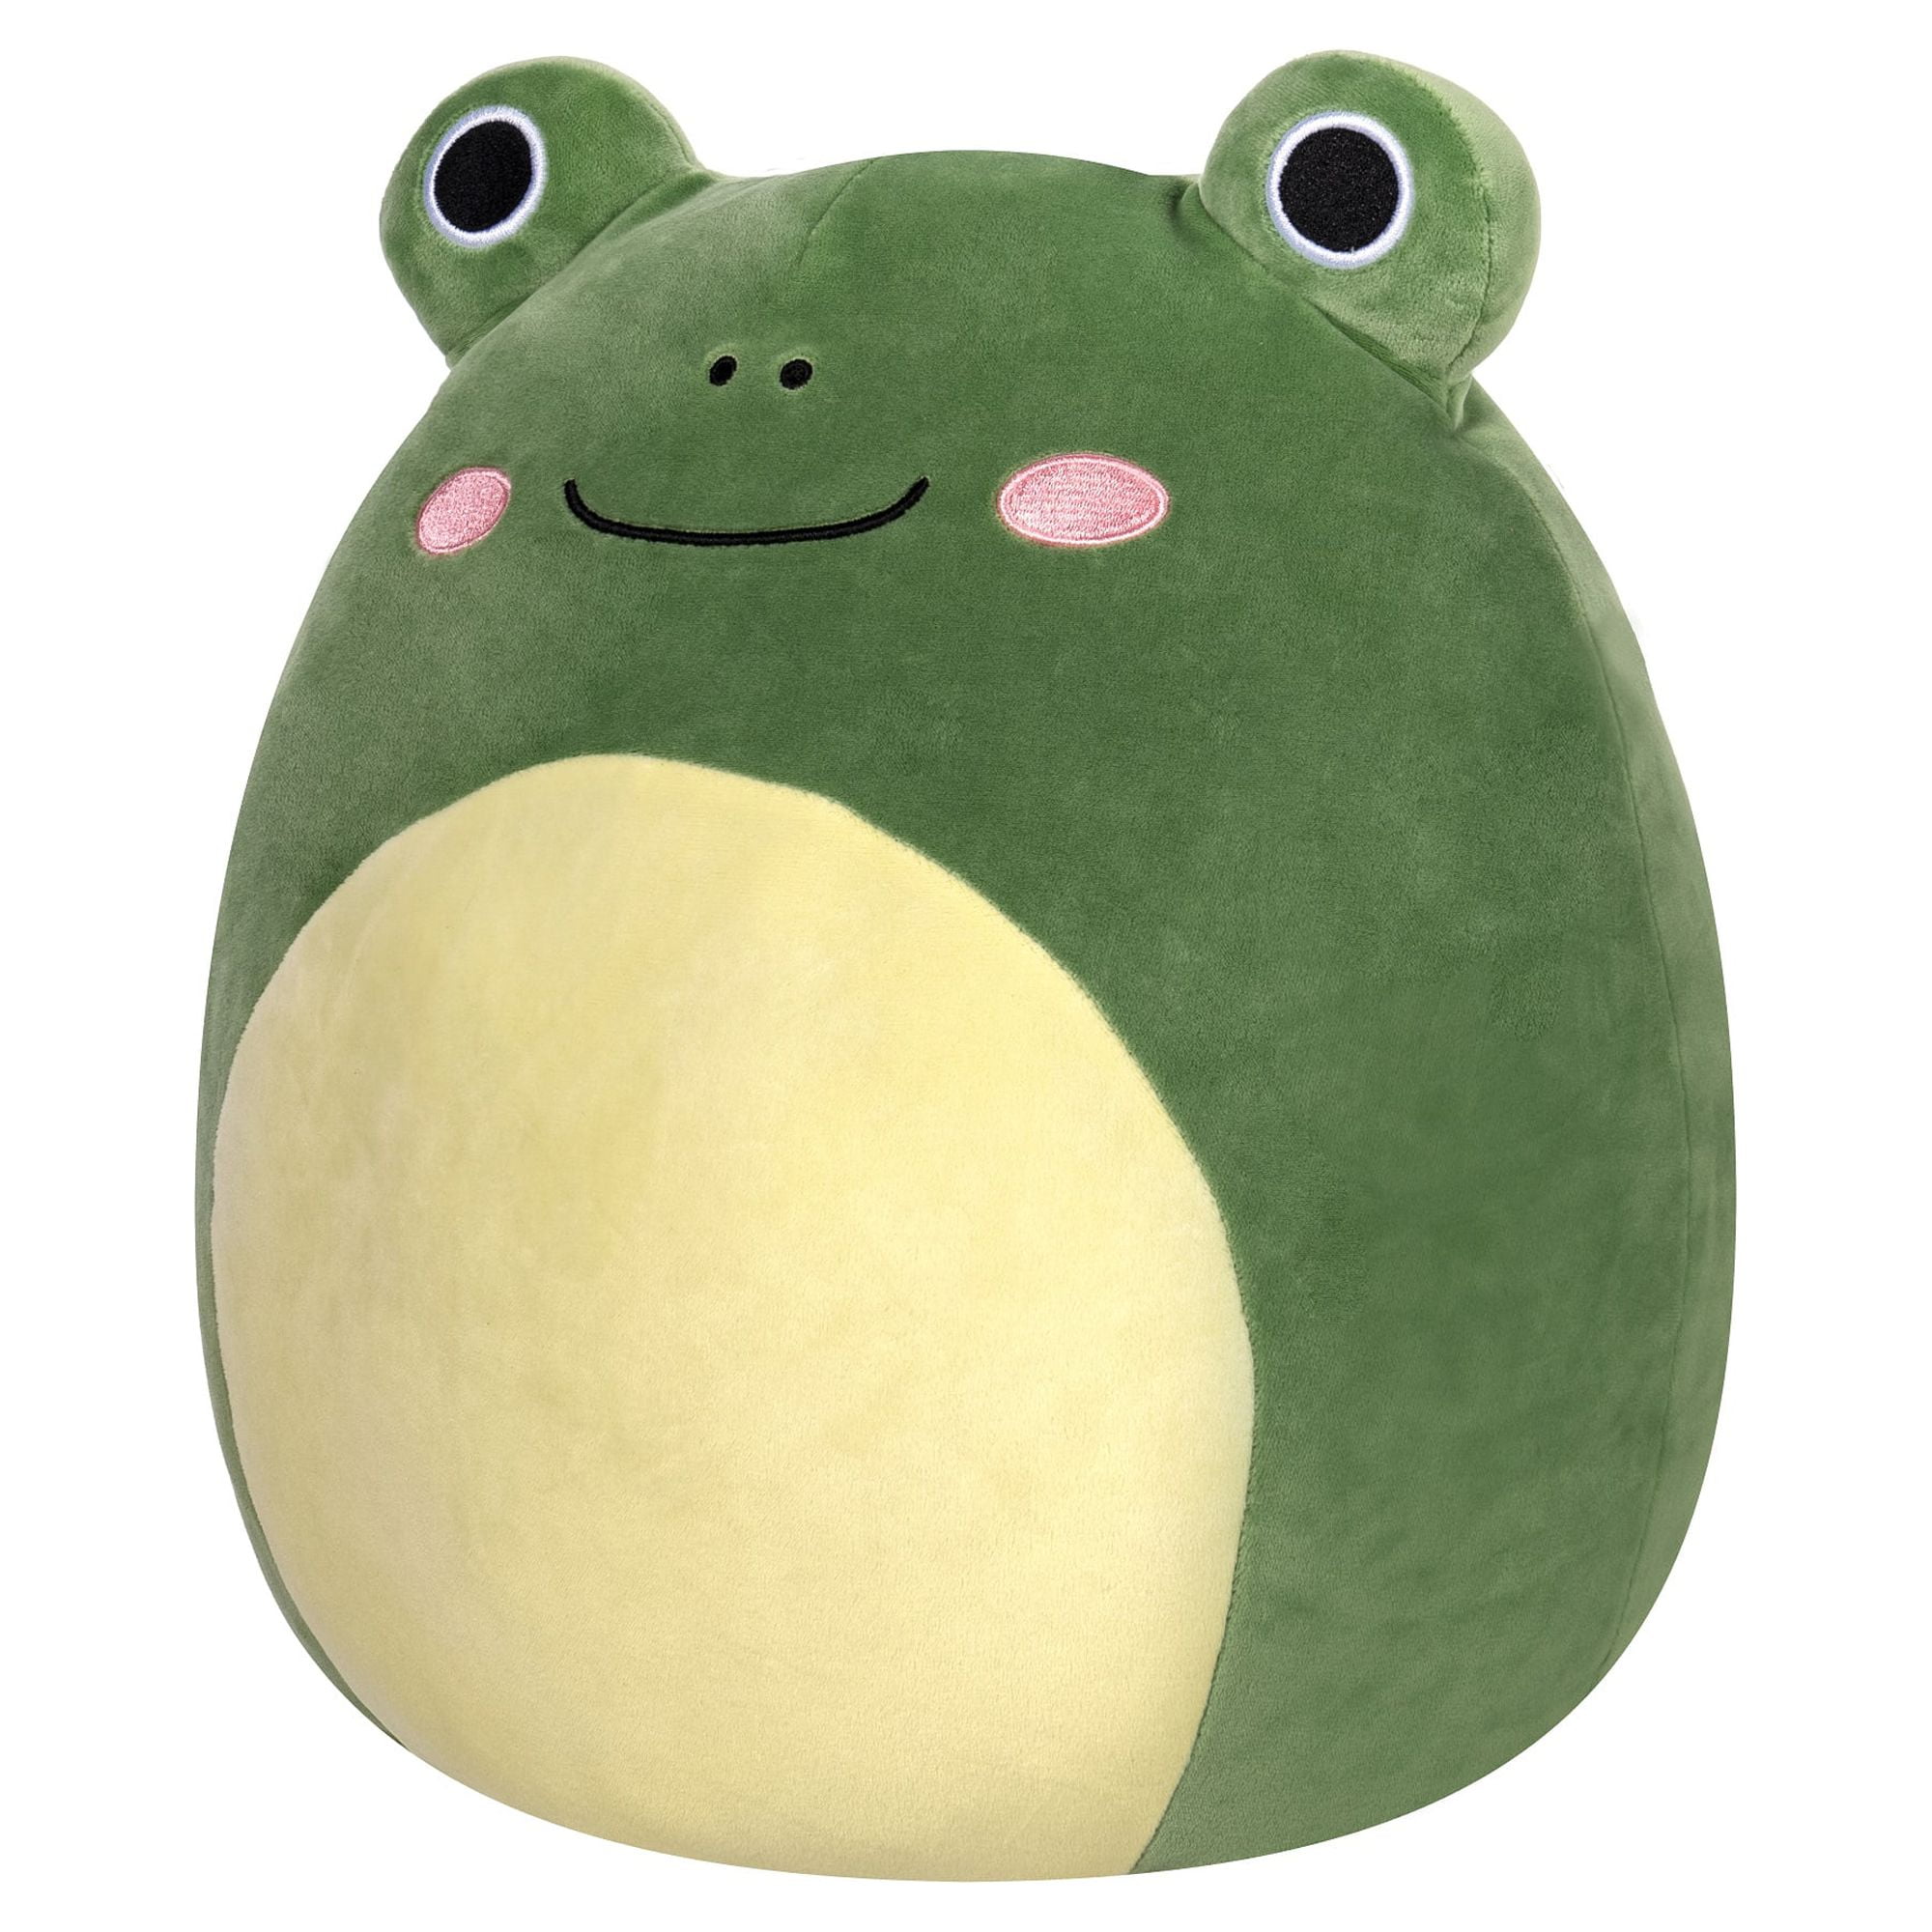 Squishmallows Wyatt The Green Laughing Frog 12 NWT Select Series